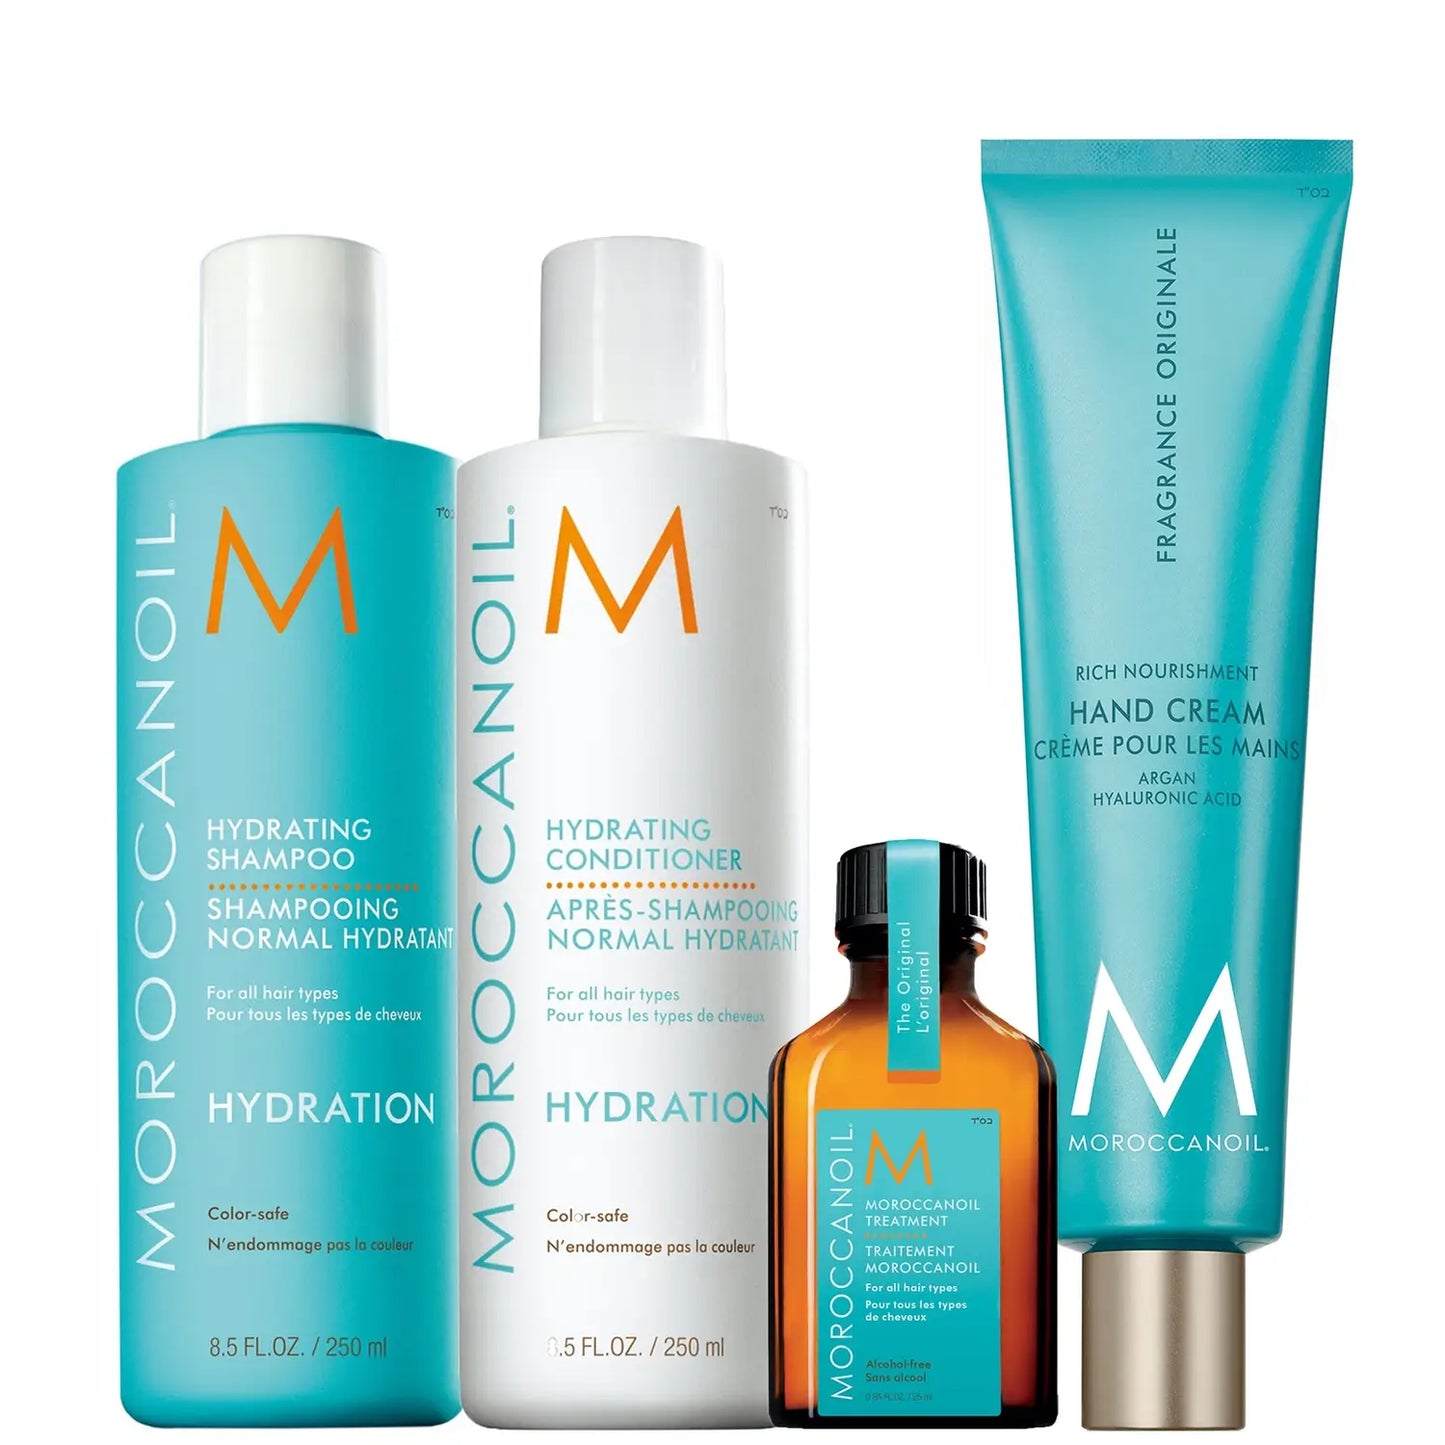 MOROCCANOIL | HYDRATING SHAMPOO AND CONDITIONER GIFT SET